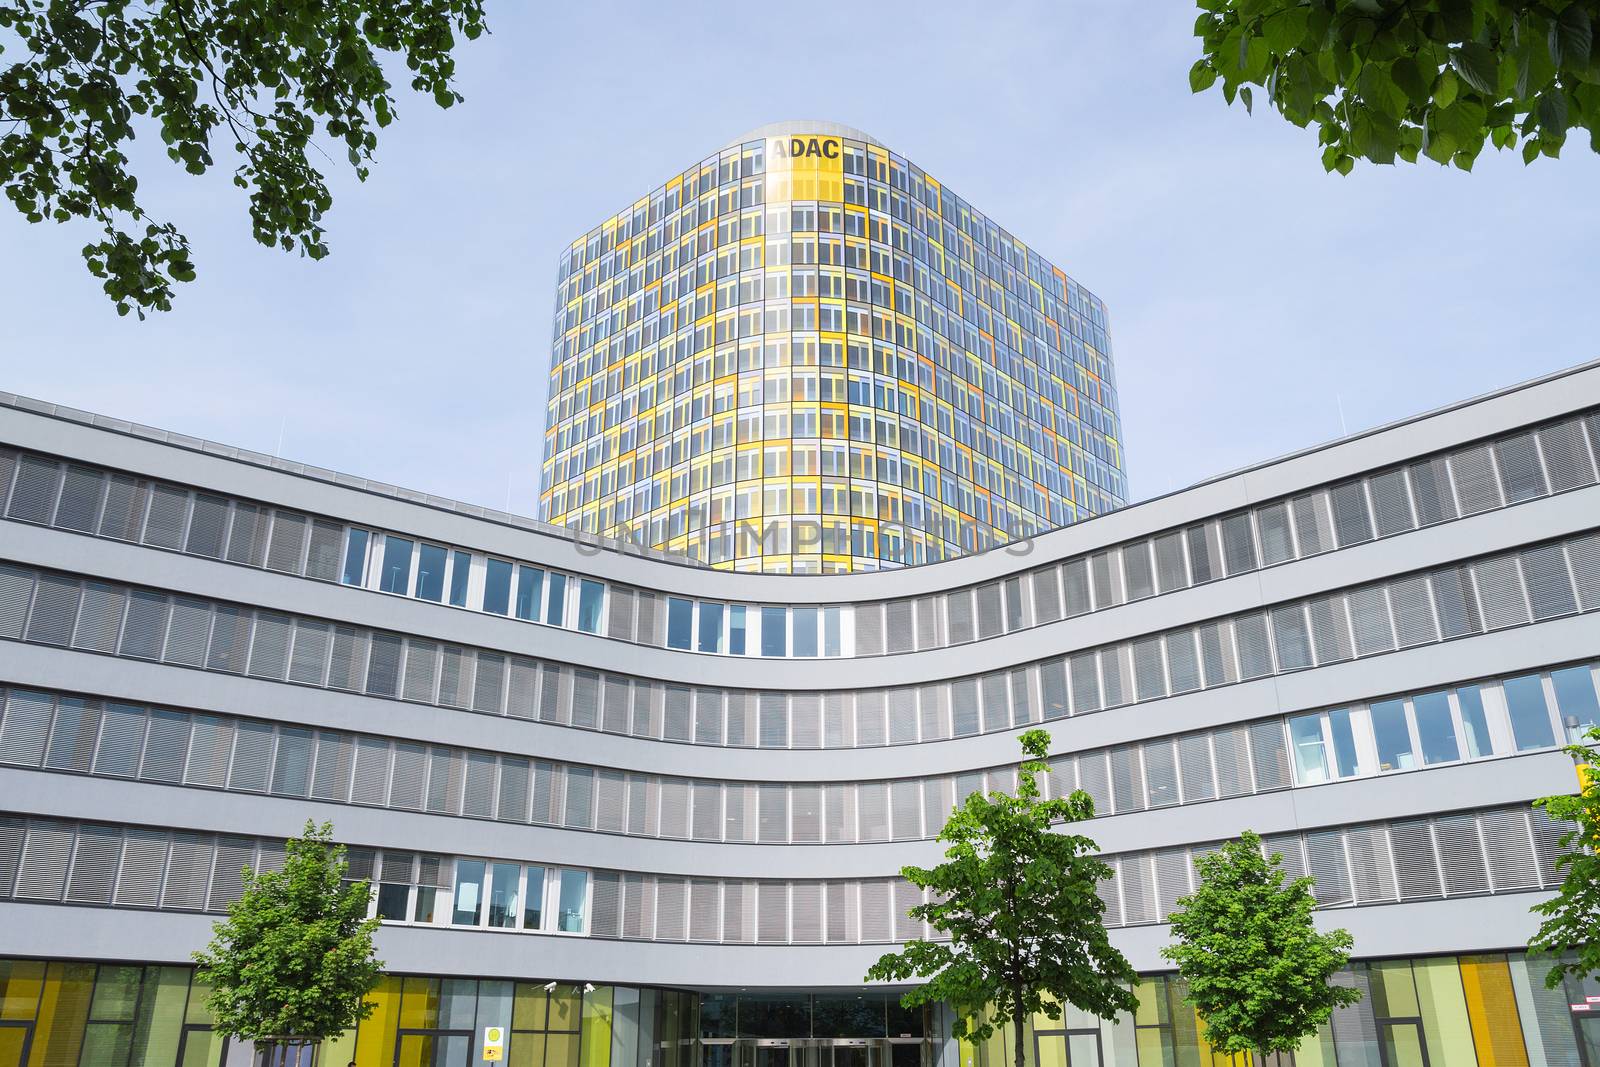 Munich, Germany - May 12, 2015: Facade of new modern ADAC headquarters and offices building. ADAC is the largest club for car owners in Europe.